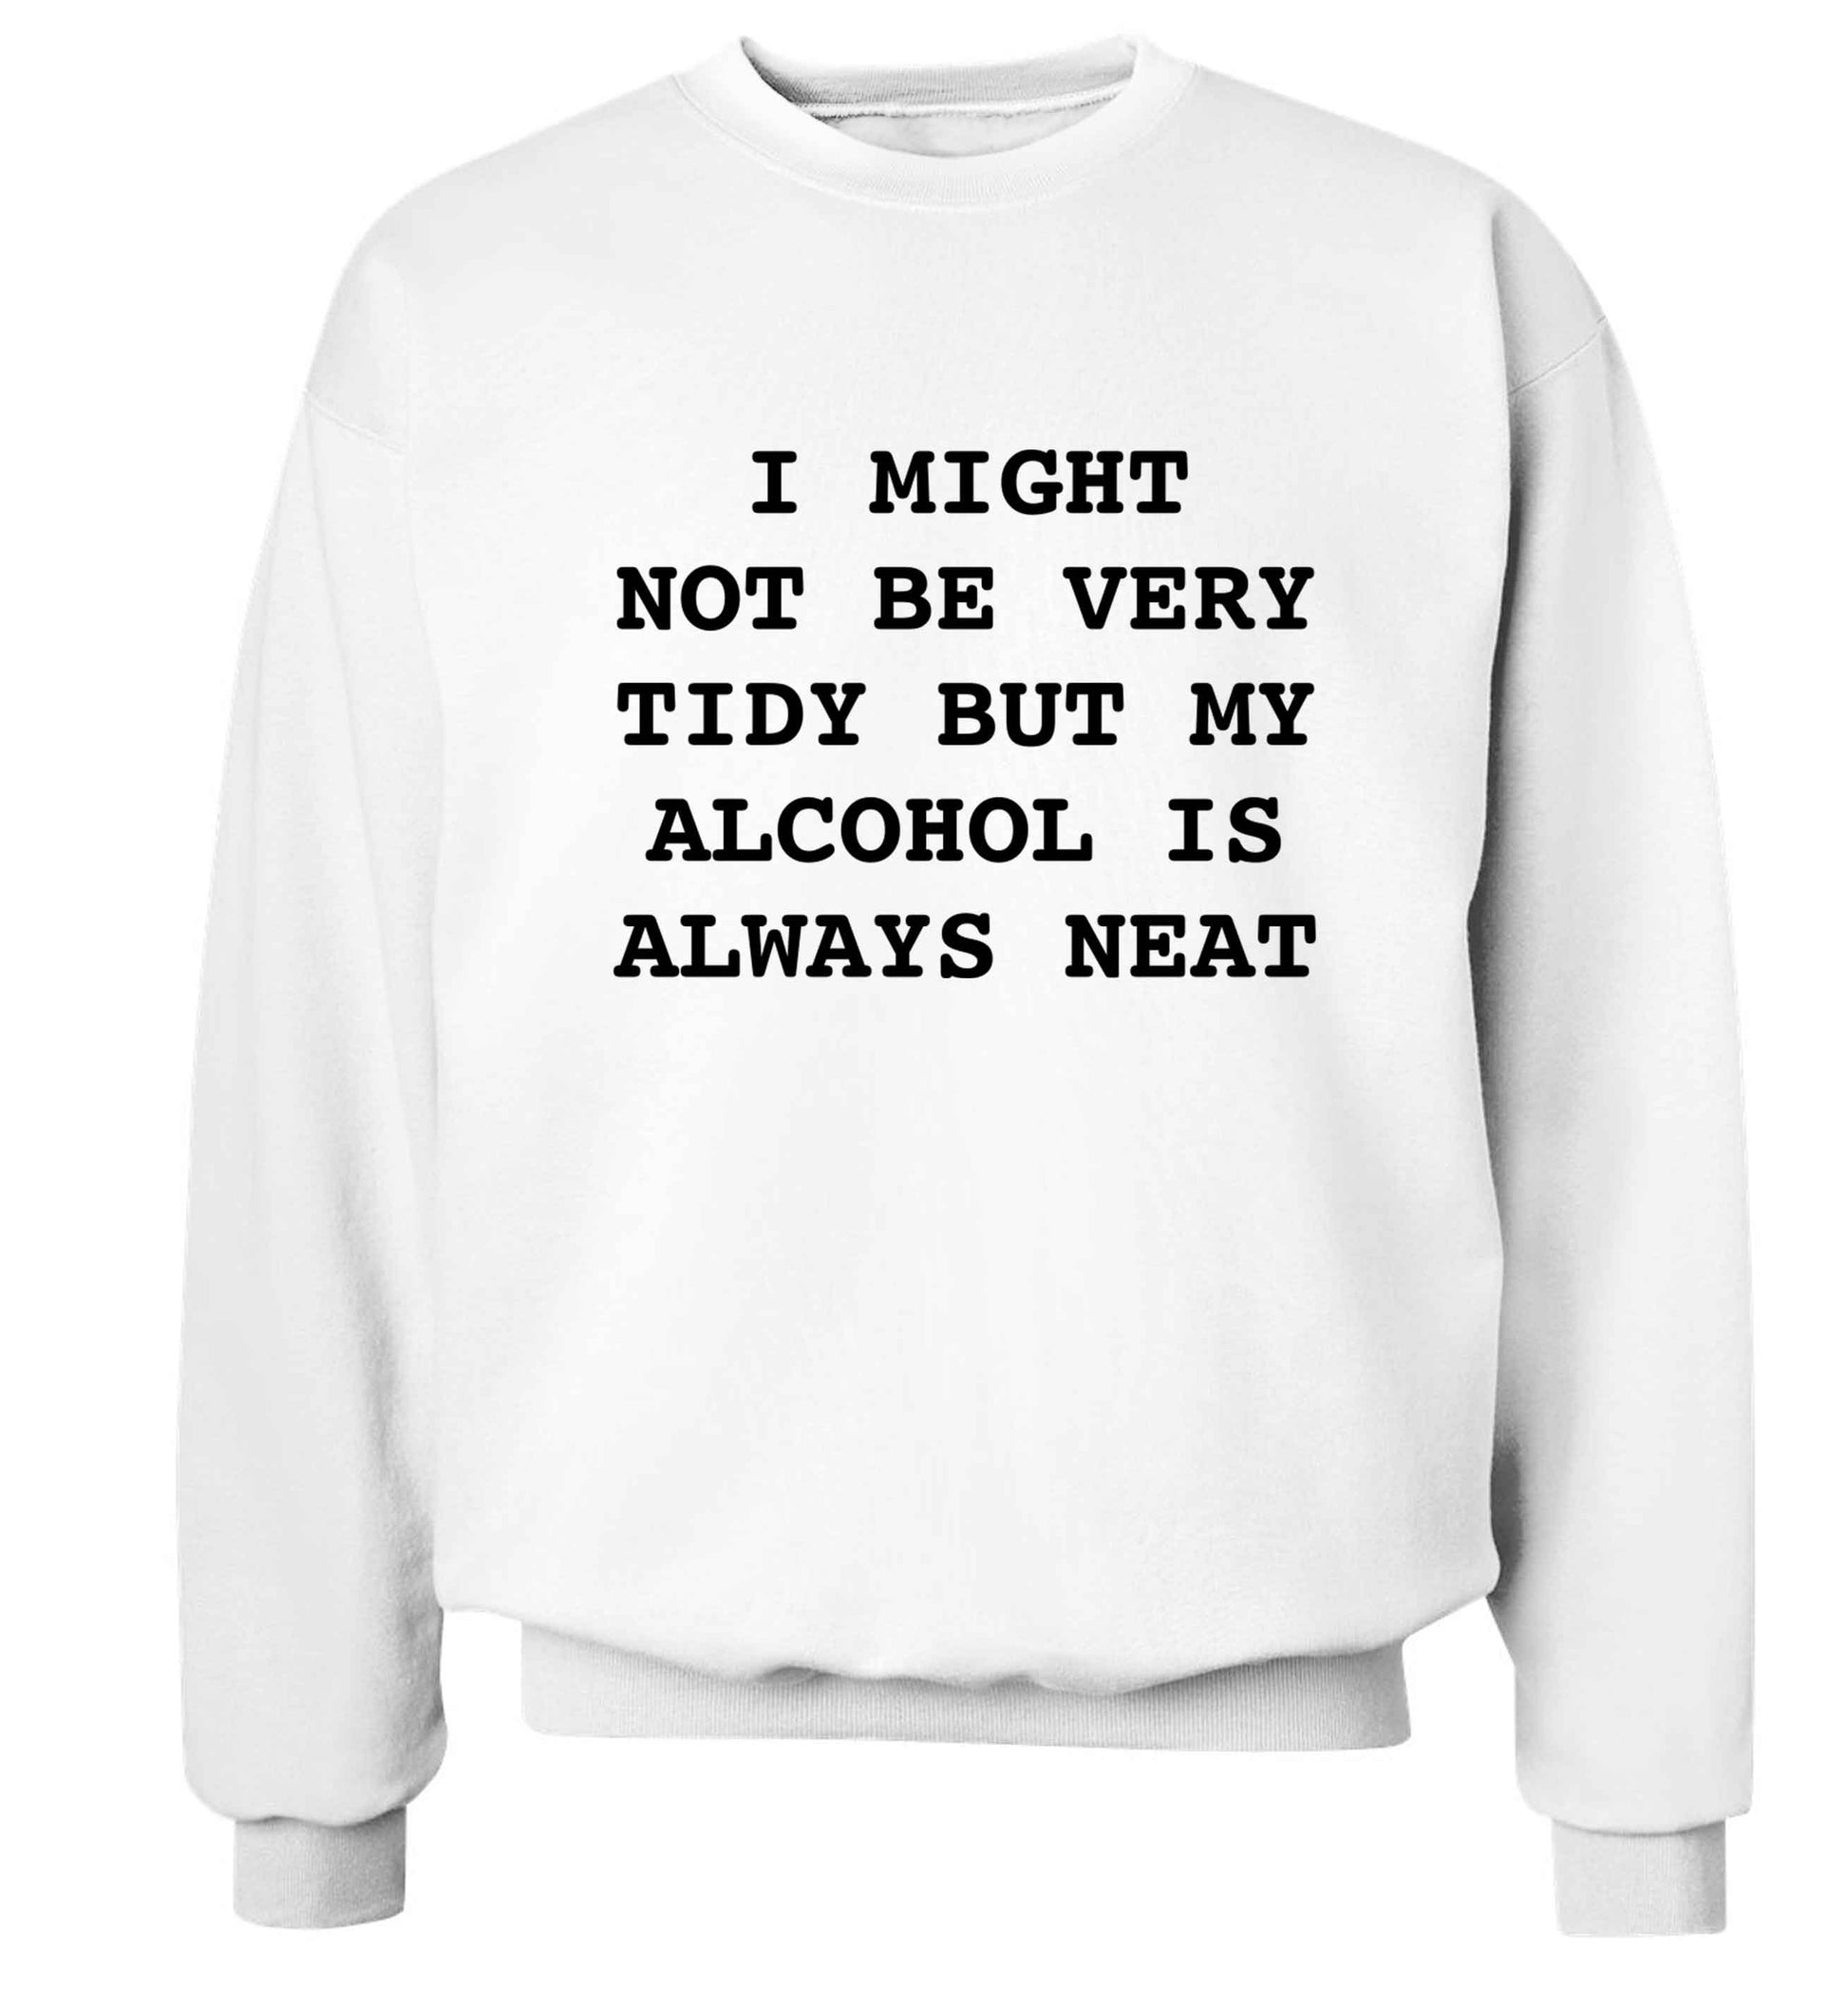 I might not be tidy but my alcohol is always neat Adult's unisex white Sweater 2XL